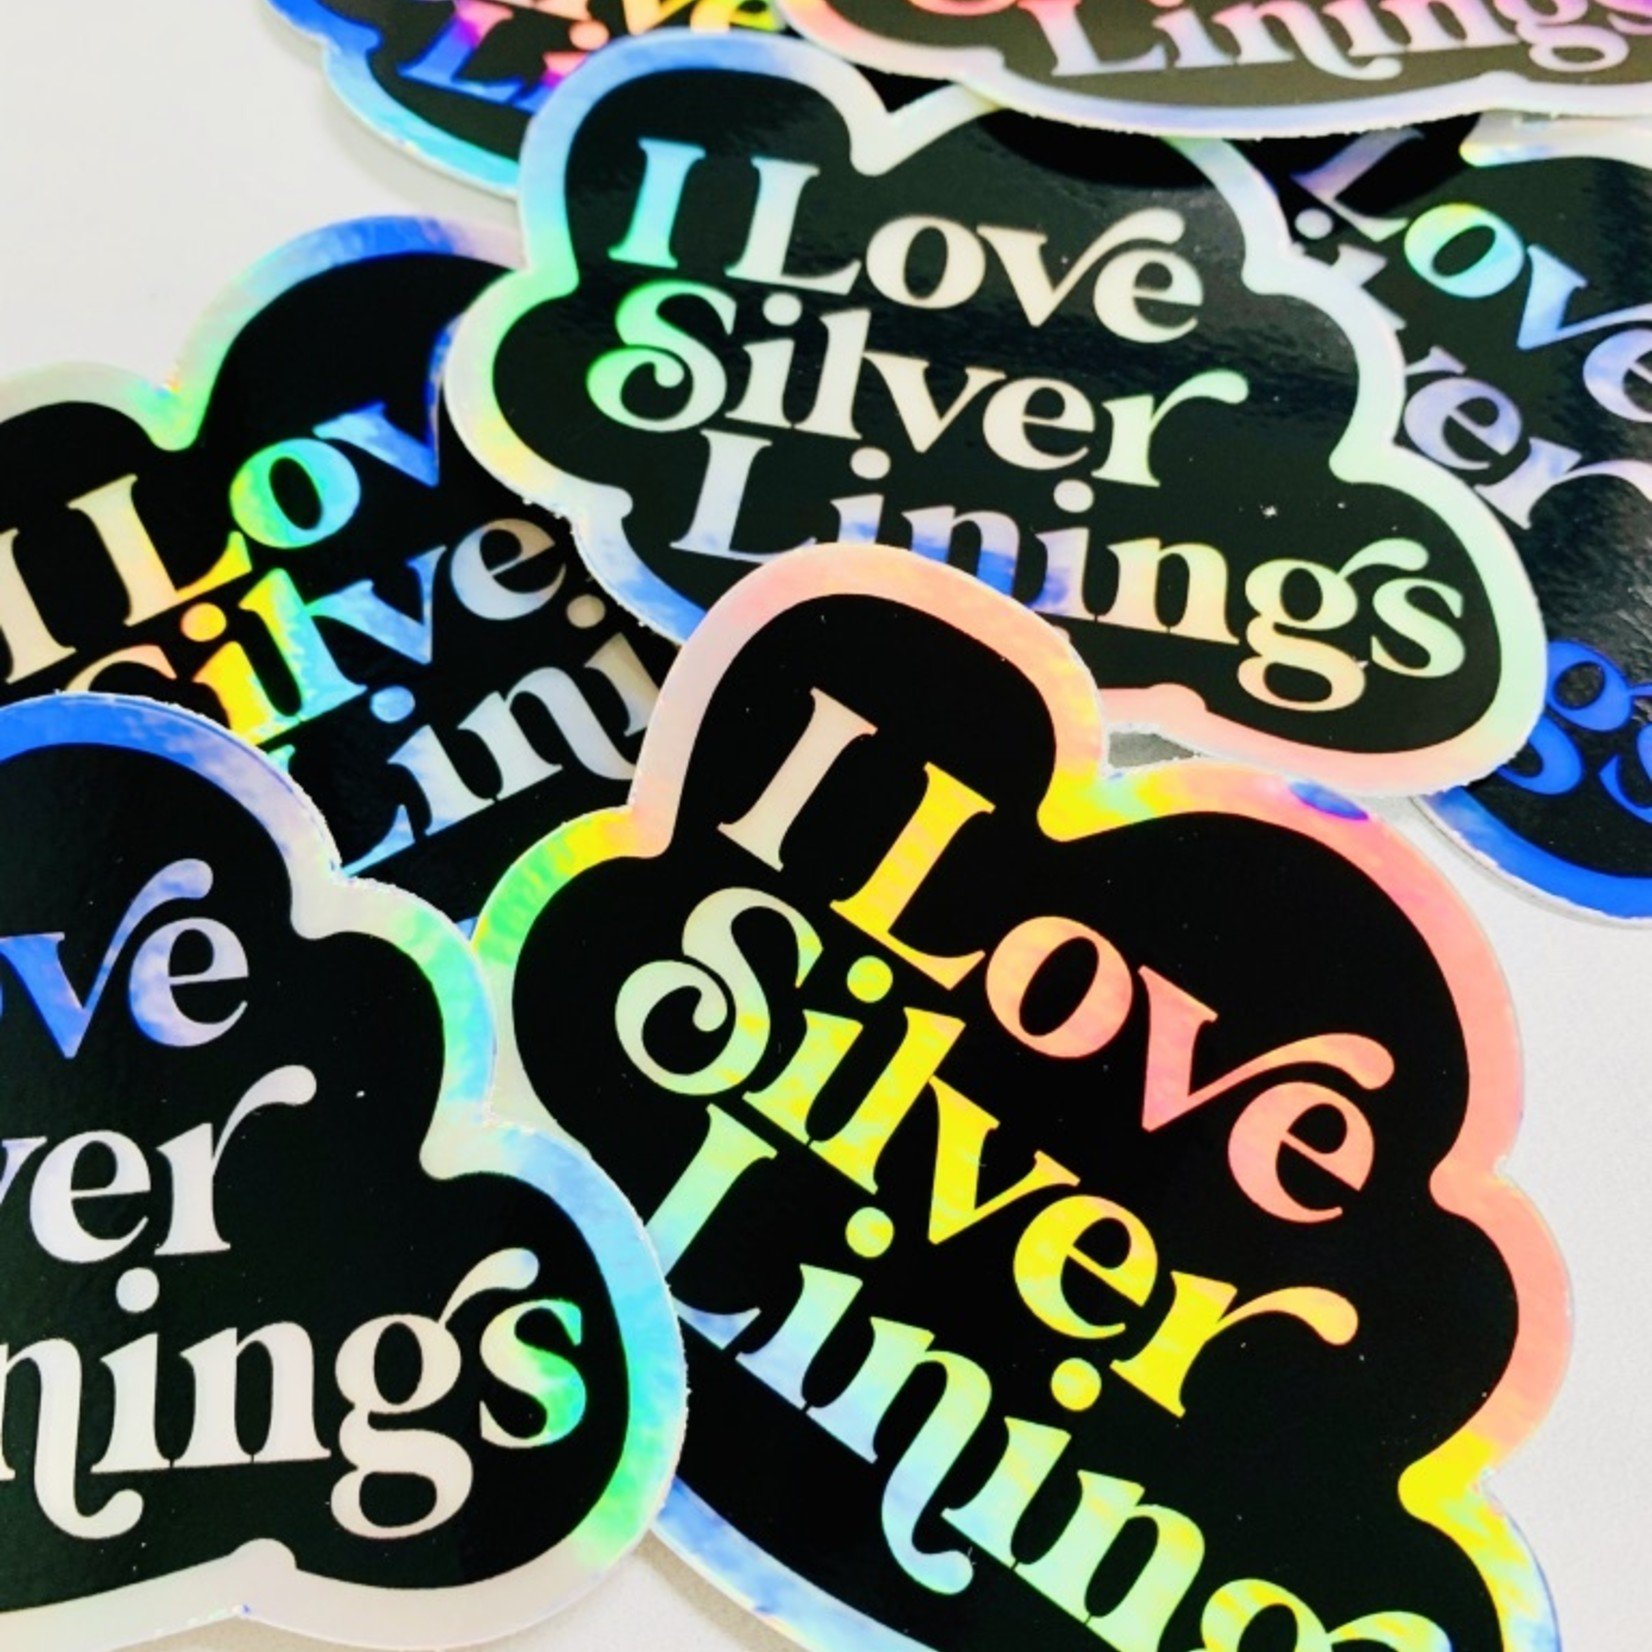 "I Love Silver Linings" Holographic Die Cut Sticker